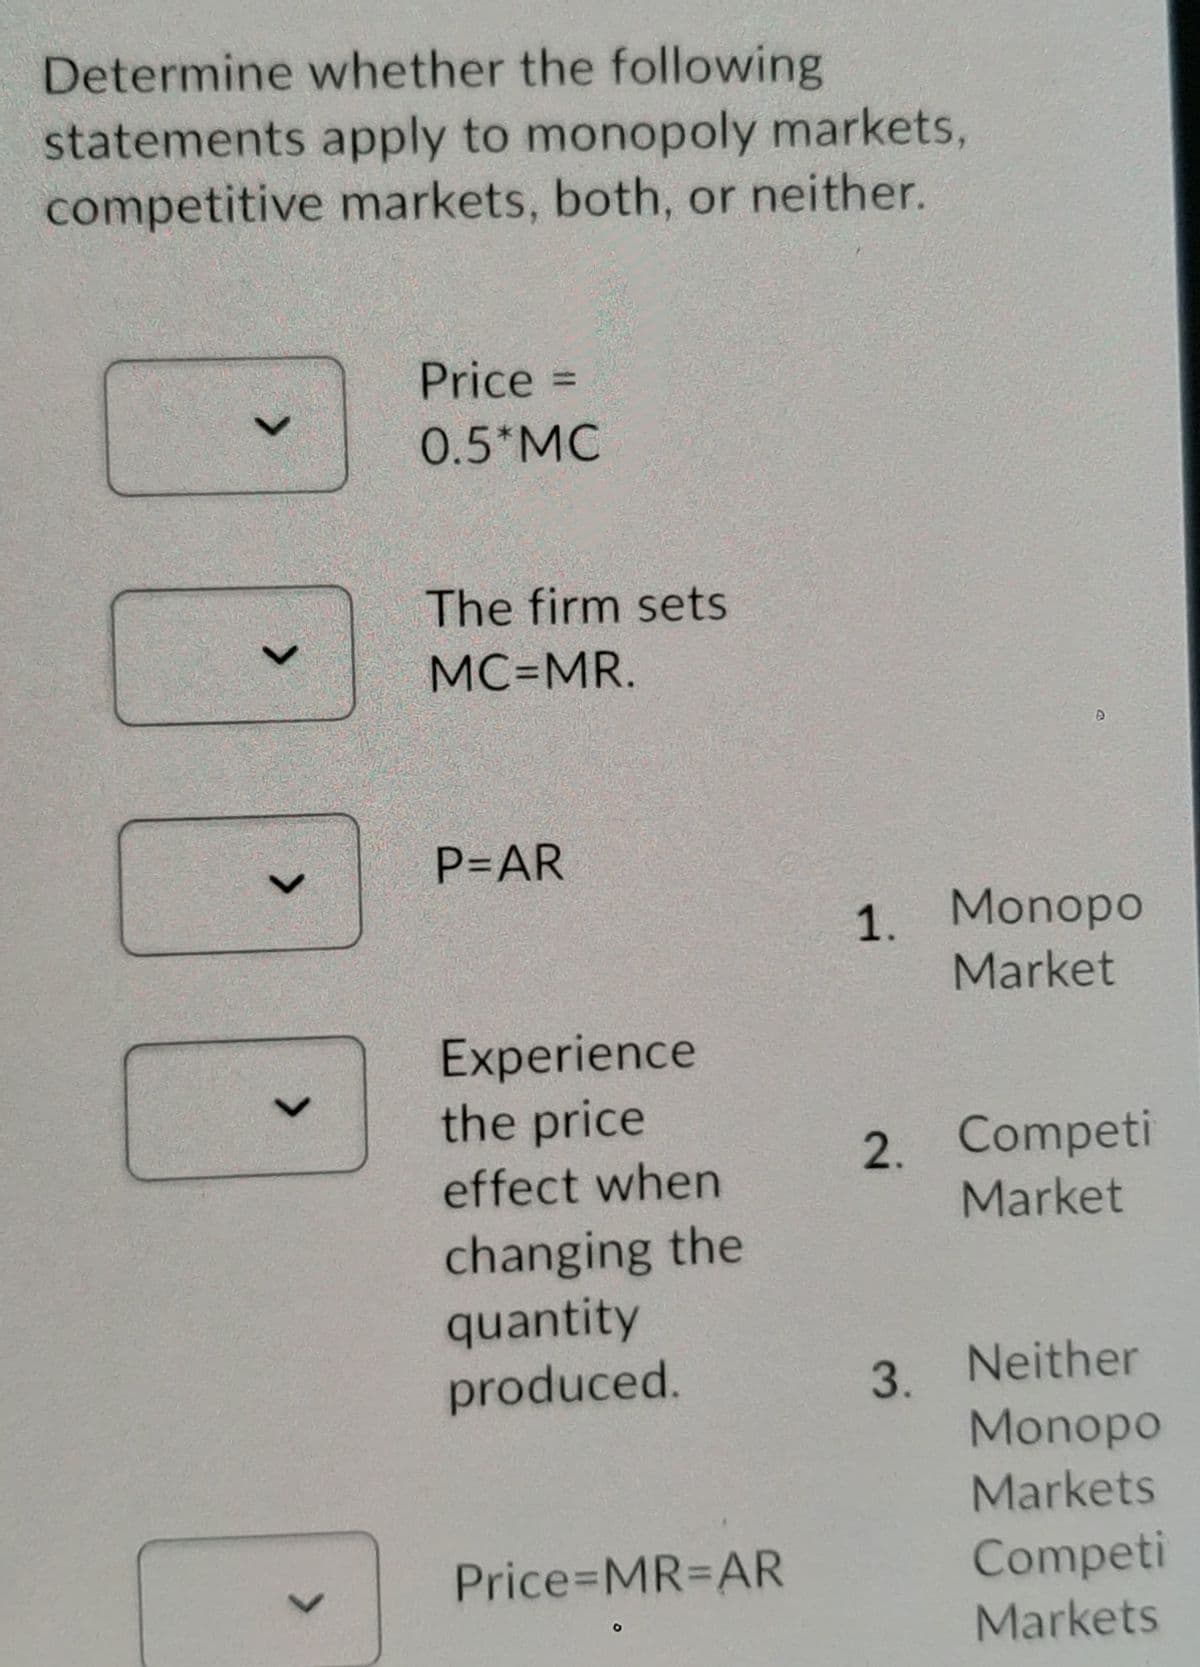 Determine whether the following
statements apply to monopoly markets,
competitive markets, both, or neither.
Price =
%3D
0.5*MC
The firm sets
MC=MR.
P=AR
1. Monopo
Market
Experience
the price
effect when
2. Competi
Market
changing the
quantity
produced.
3. Neither
Monopo
Markets
Price MR%3DAR
Competi
Markets
<>
<>
<>
